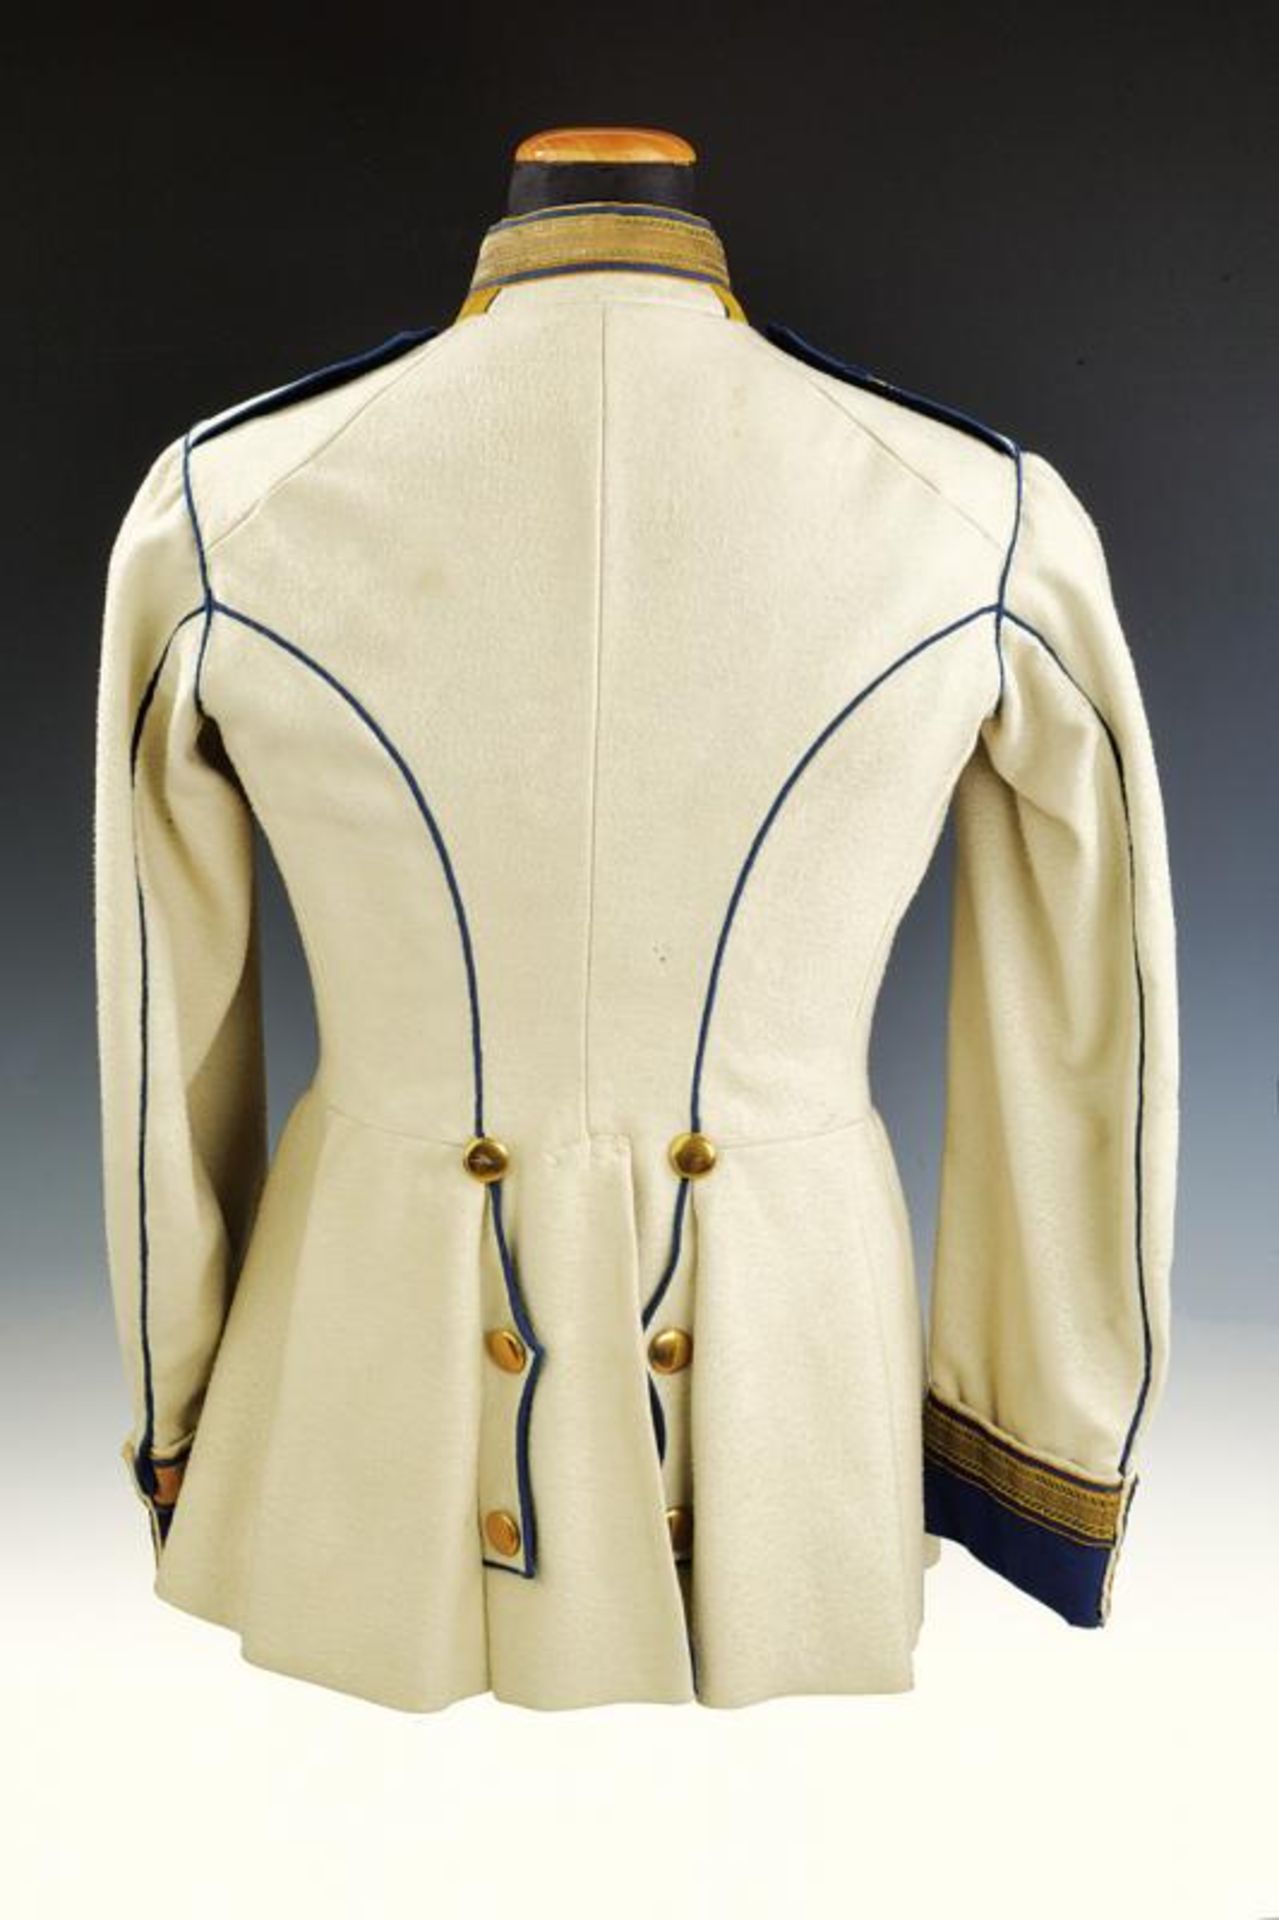 A cuirassier NC-officer's uniform - Image 6 of 7